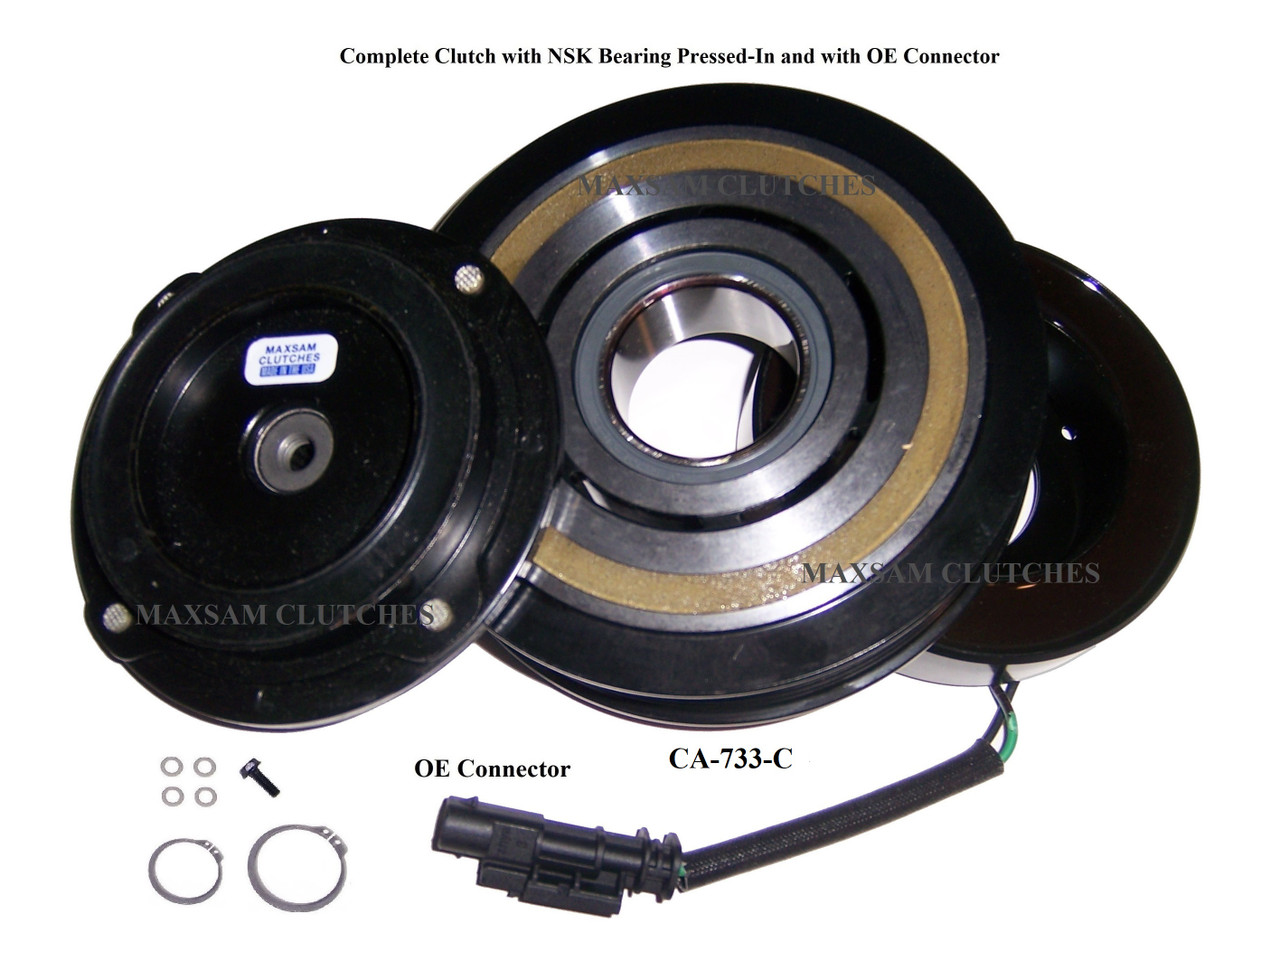 Chevy Impala & Limited 2012 - 2016 3.6 Liter AC Compressor Complete CLUTCH (Read Details) Made by Maxsam Clutches in the USA